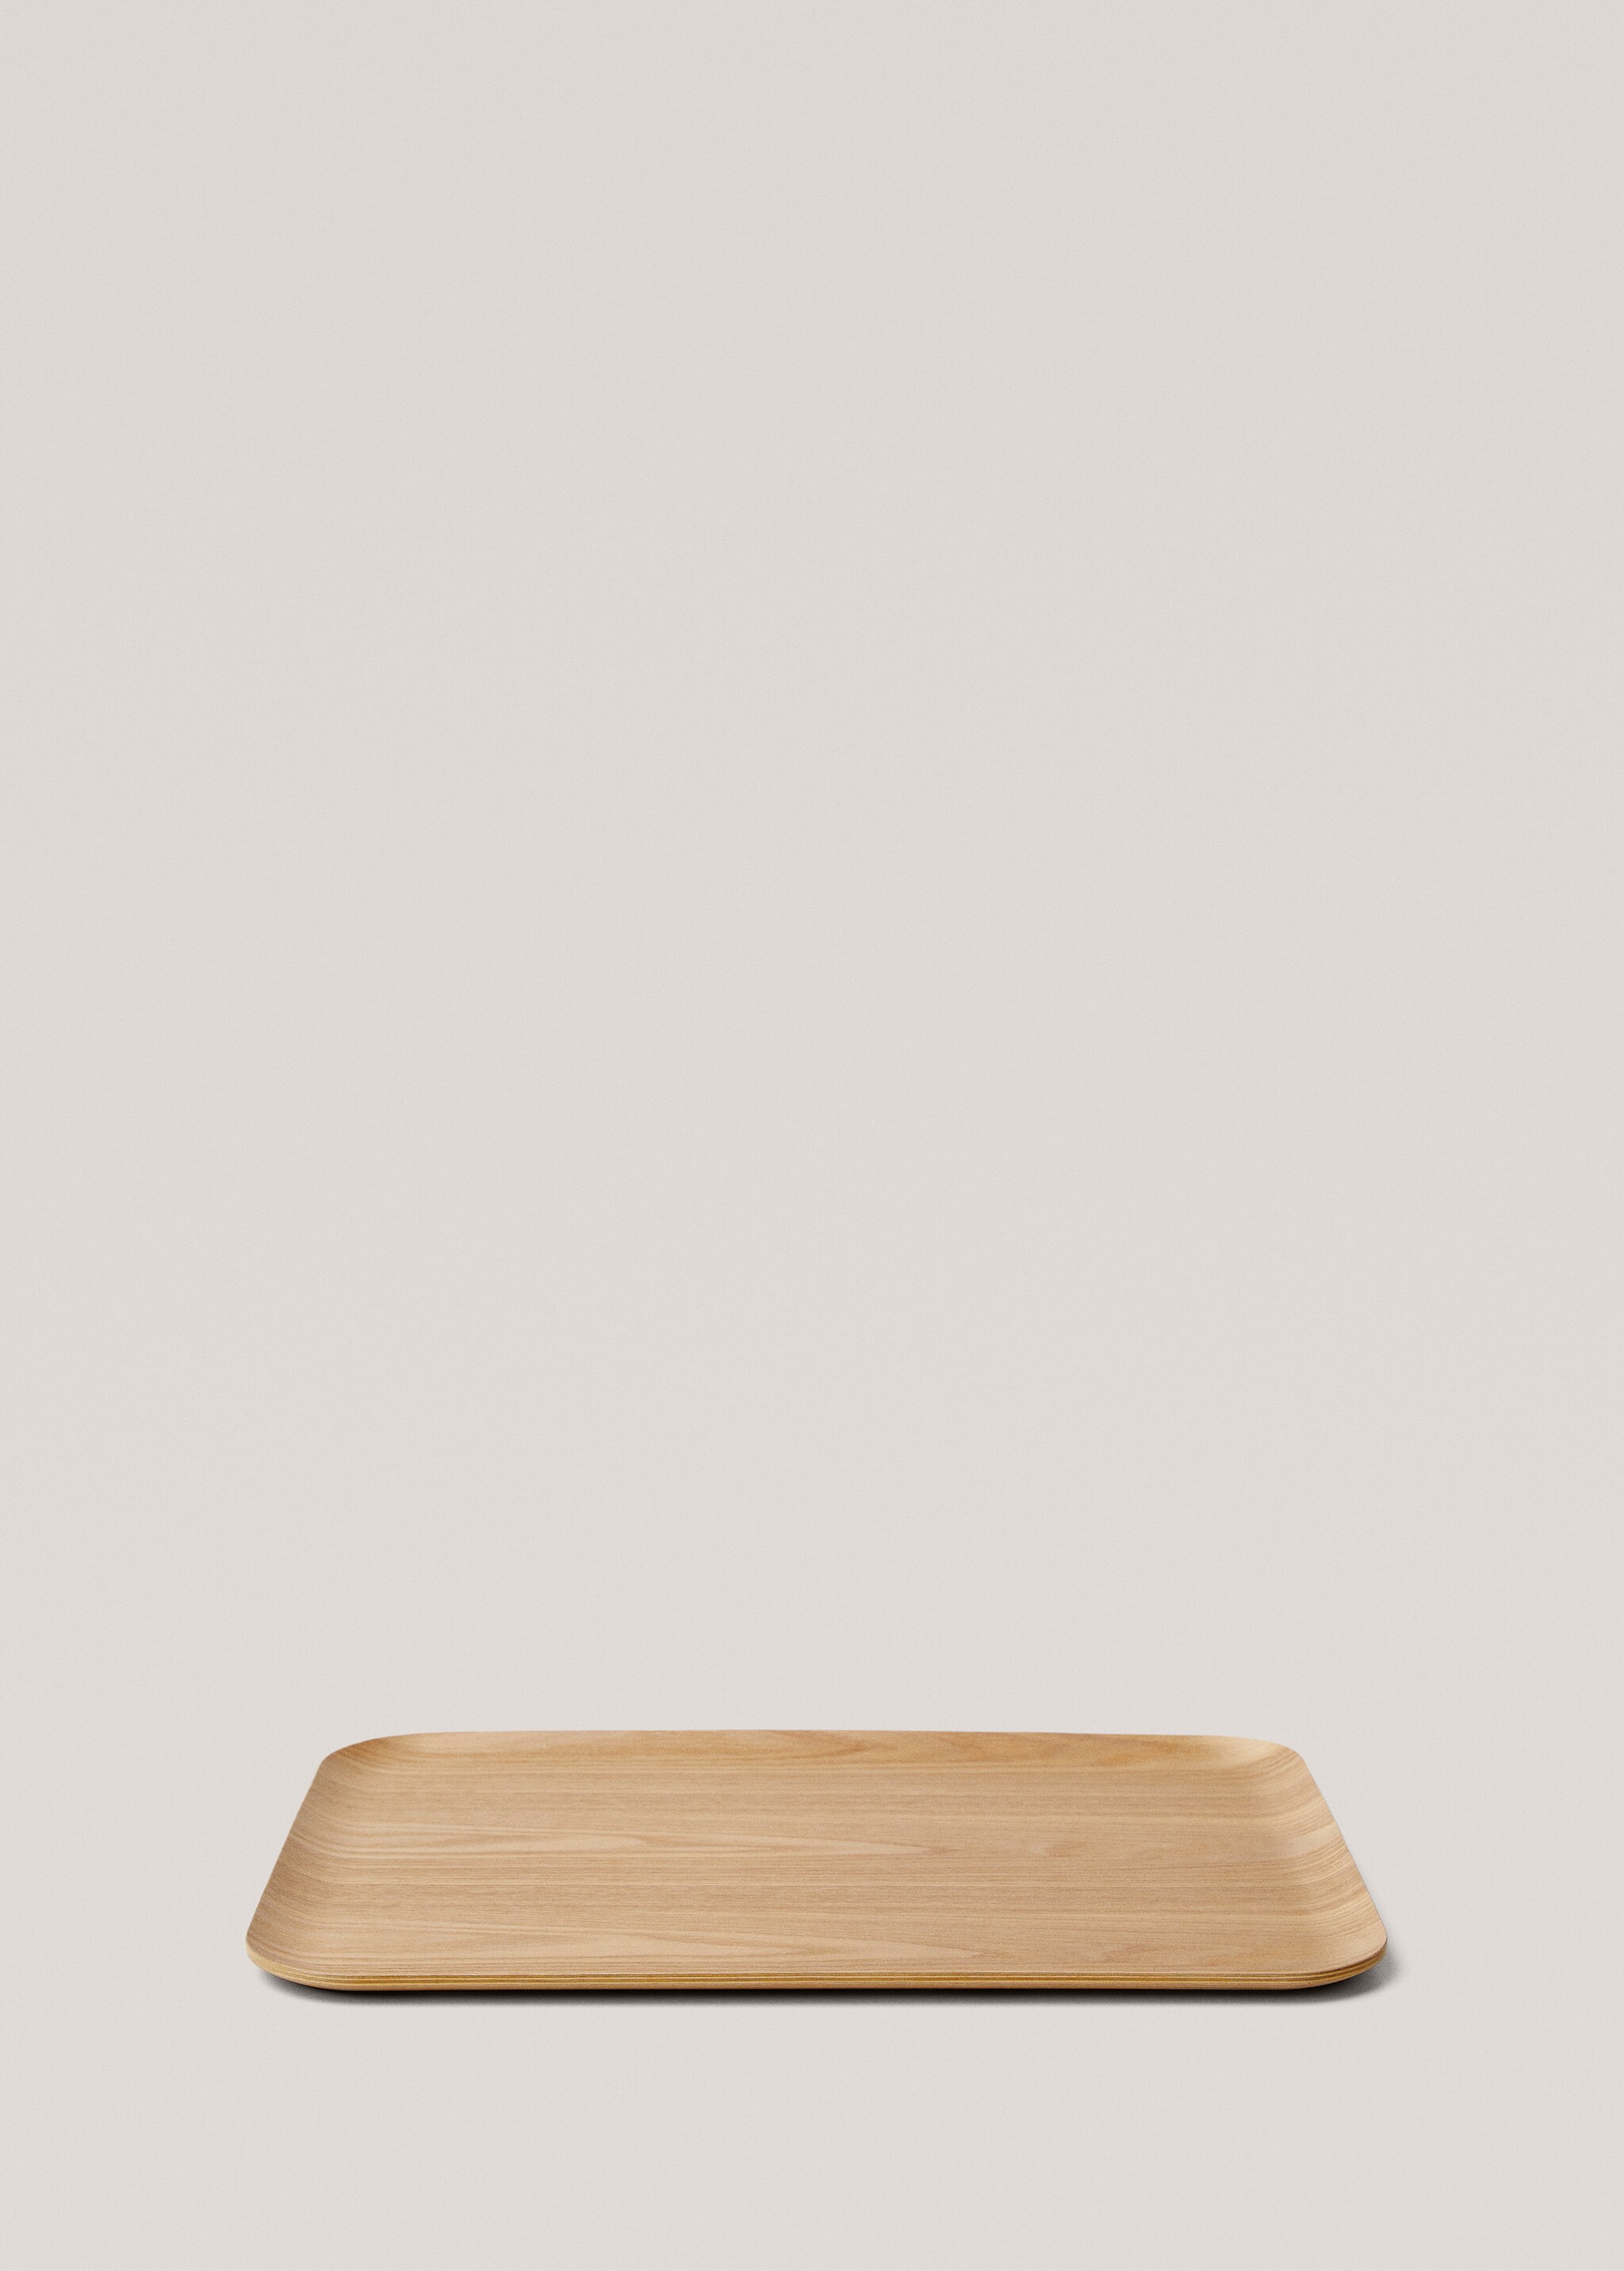 Rectangular wooden tray 46x35cm - Article without model